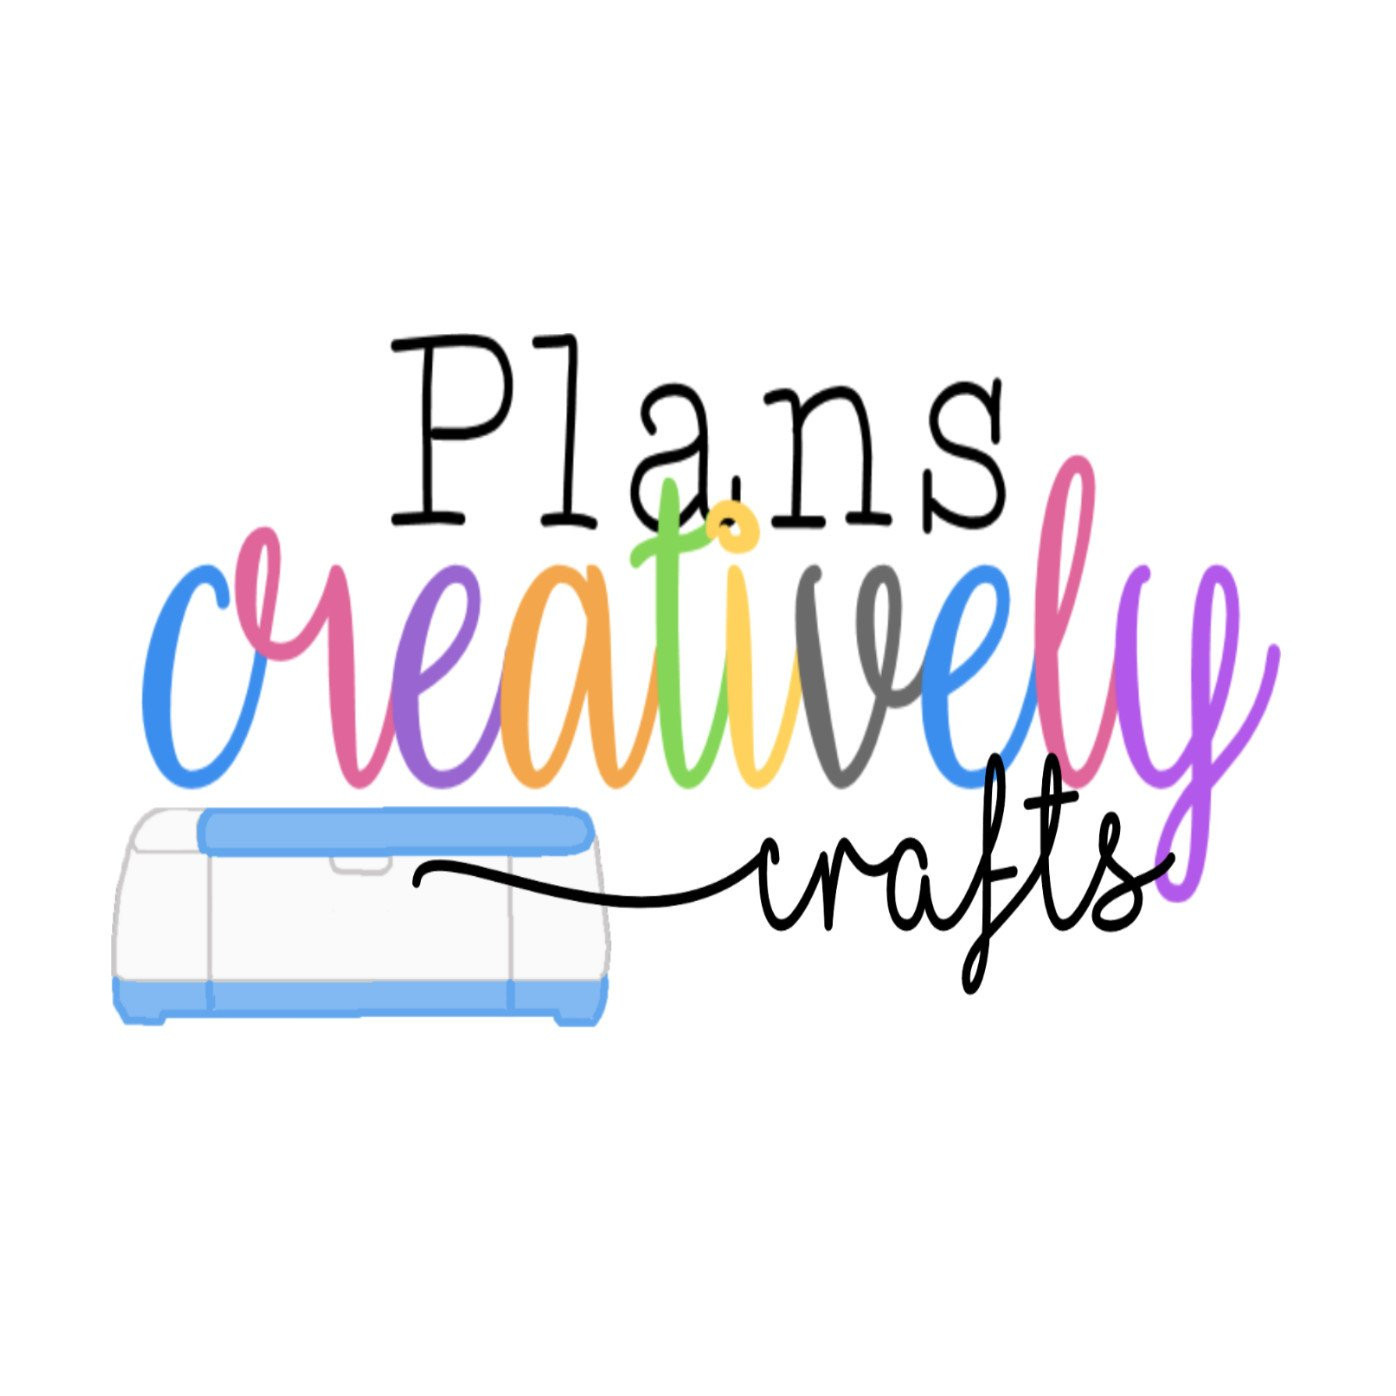 Plans Creatively Crafts - foto do perfil